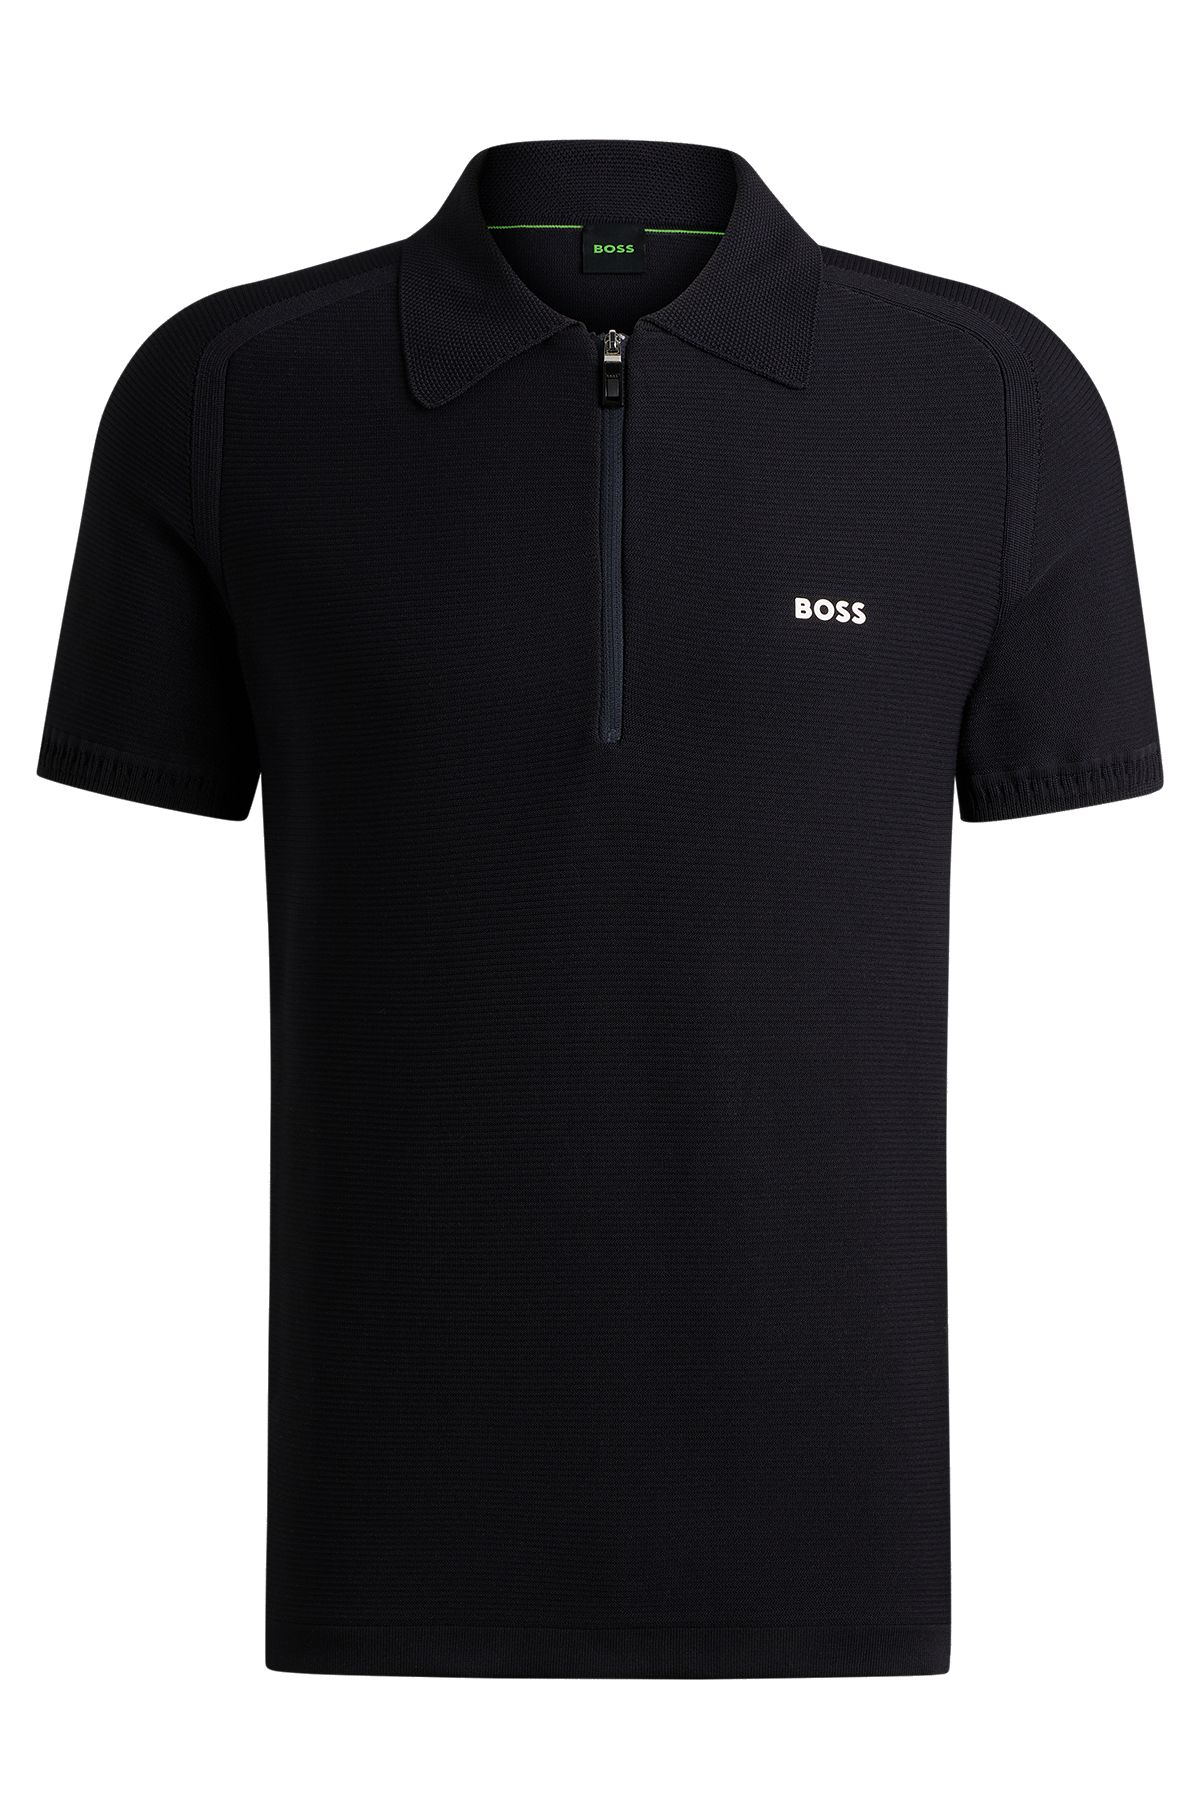 Short-sleeved zip-neck polo sweater with logo detail, Dark Blue